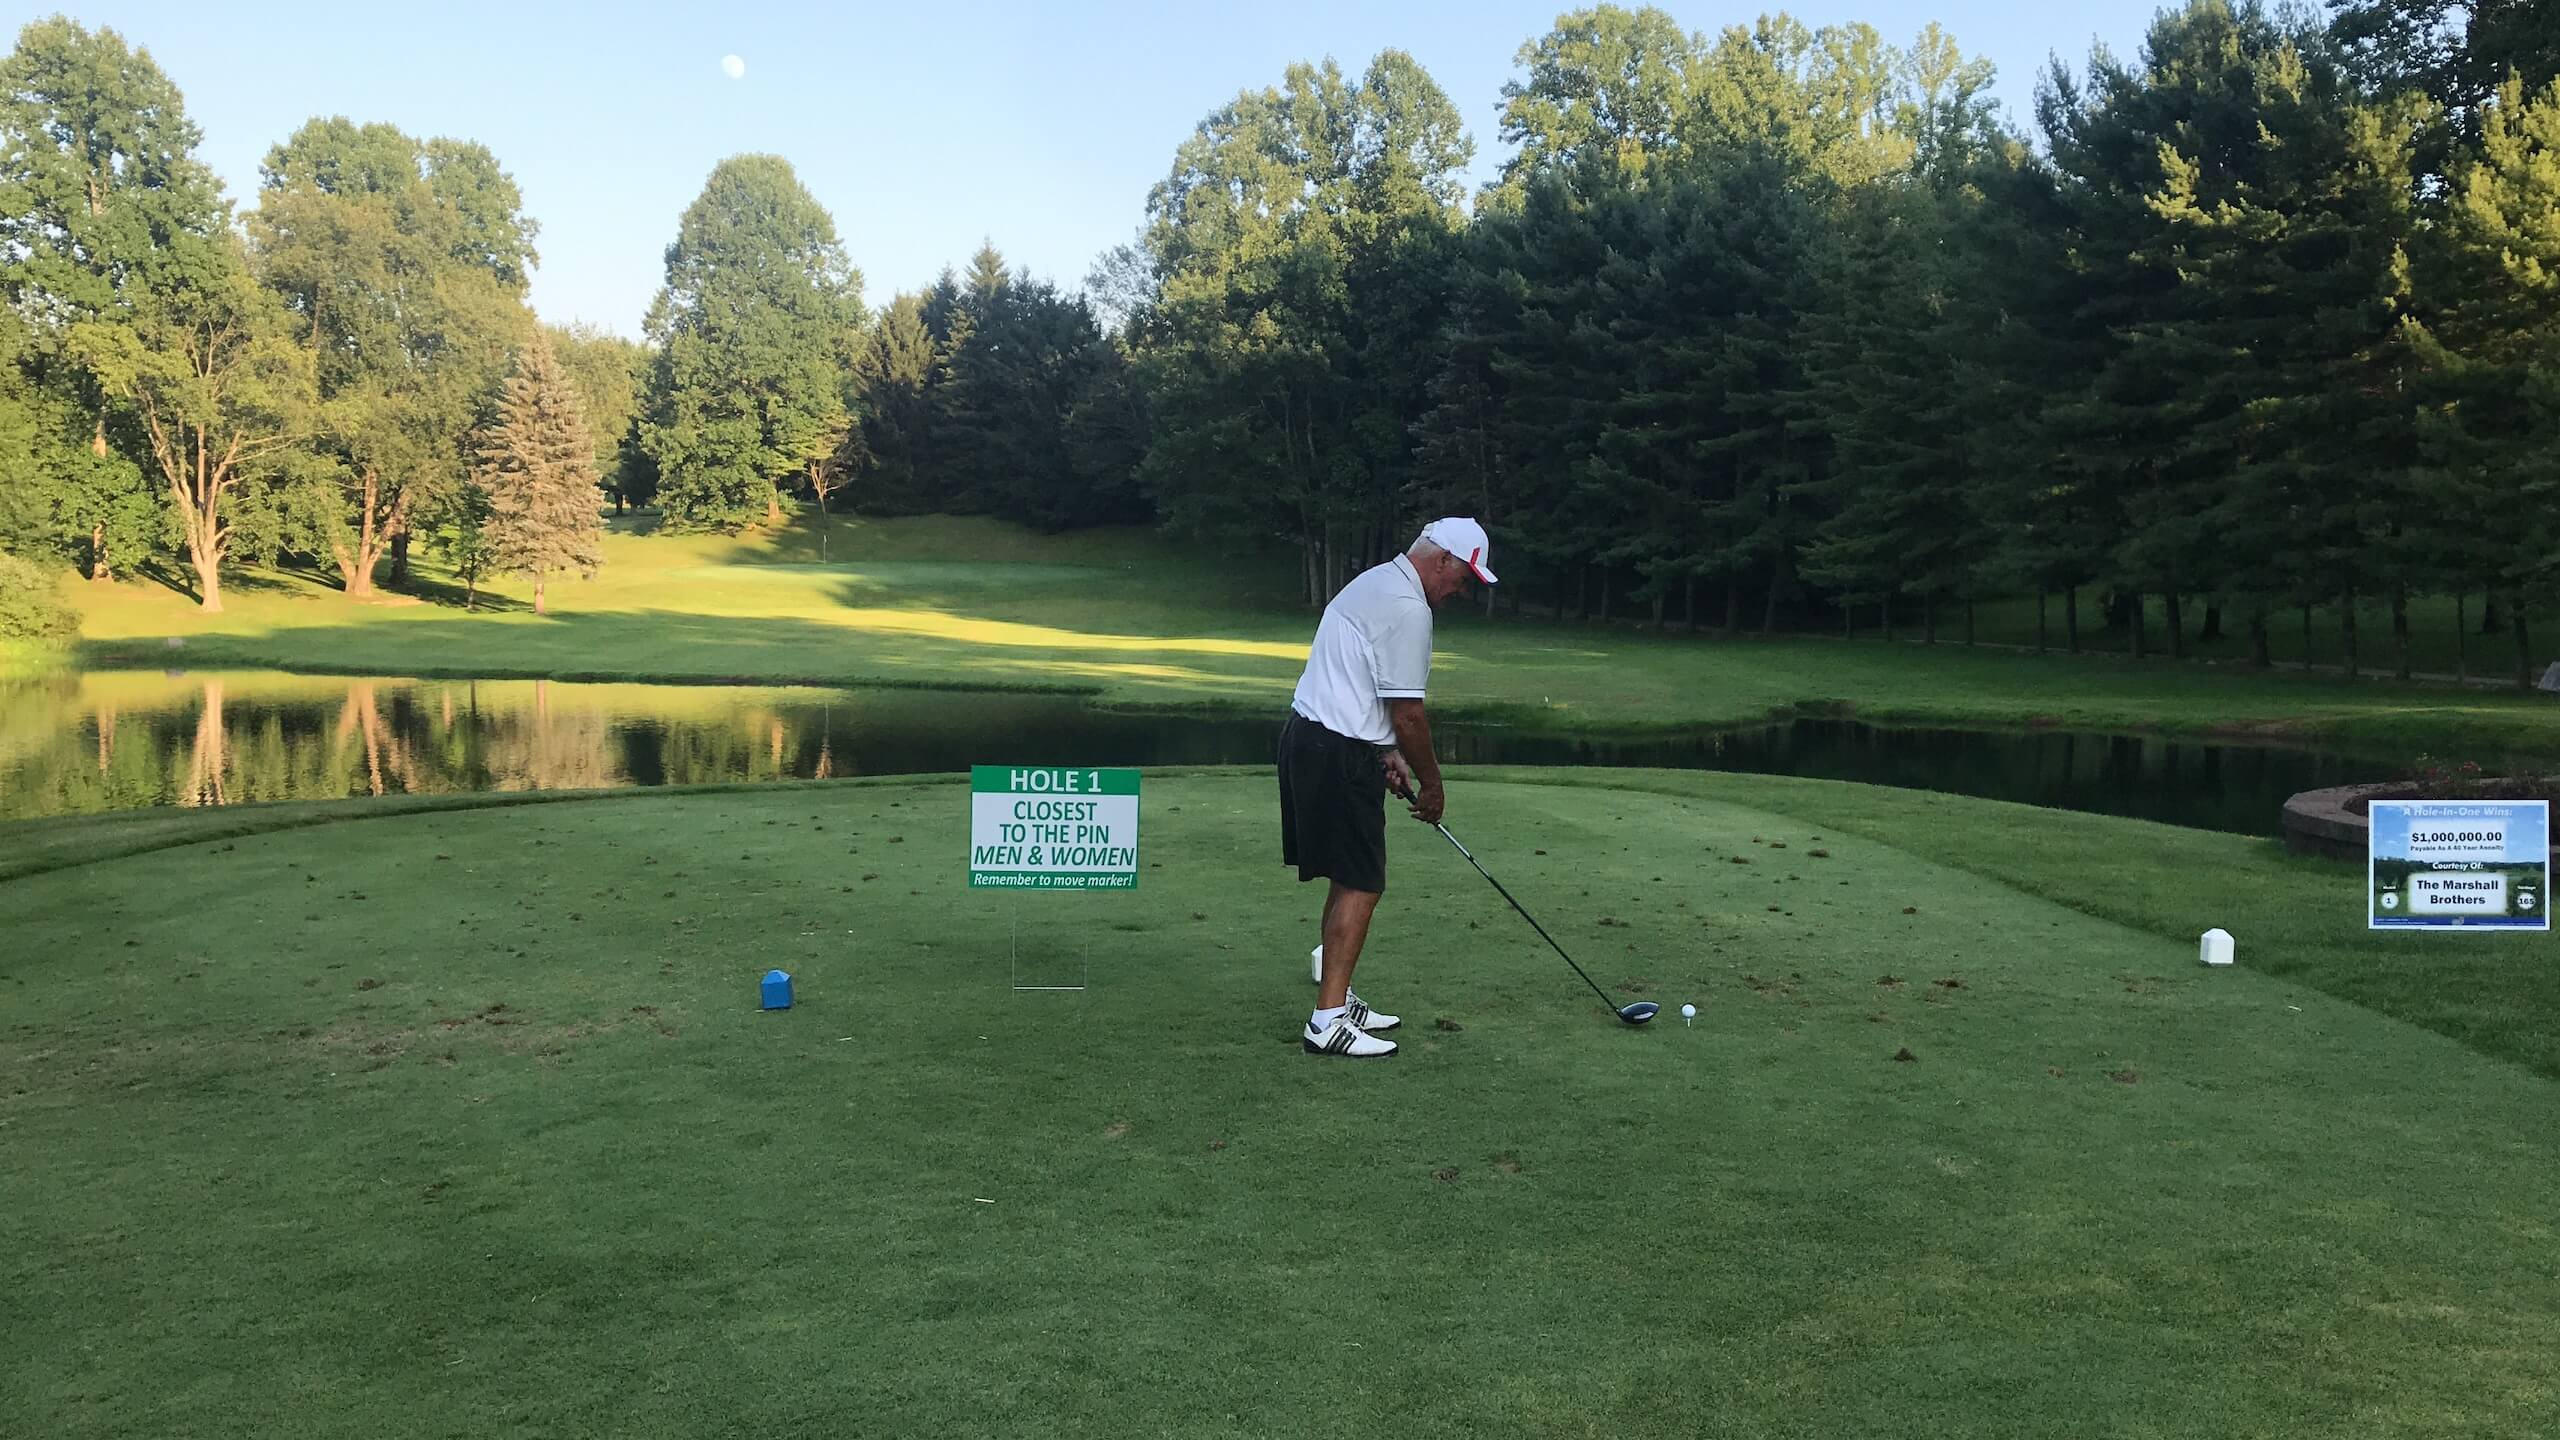 LINC golf outing participant teeing off at hole 1